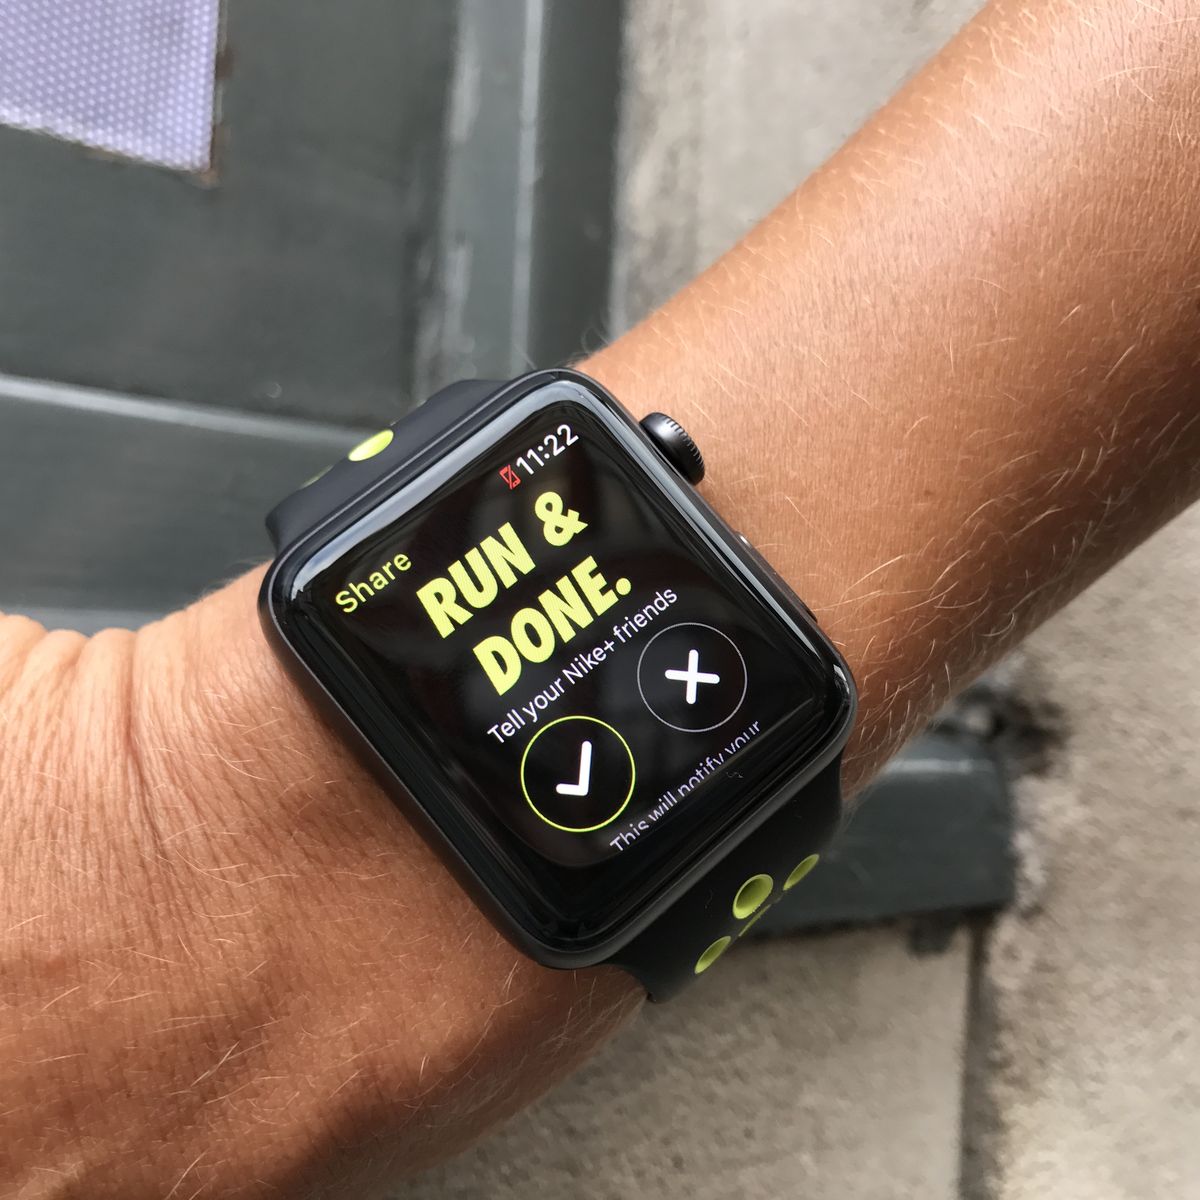 7 reasons the Apple Watch Nike+ is the ULTIMATE smartwatch